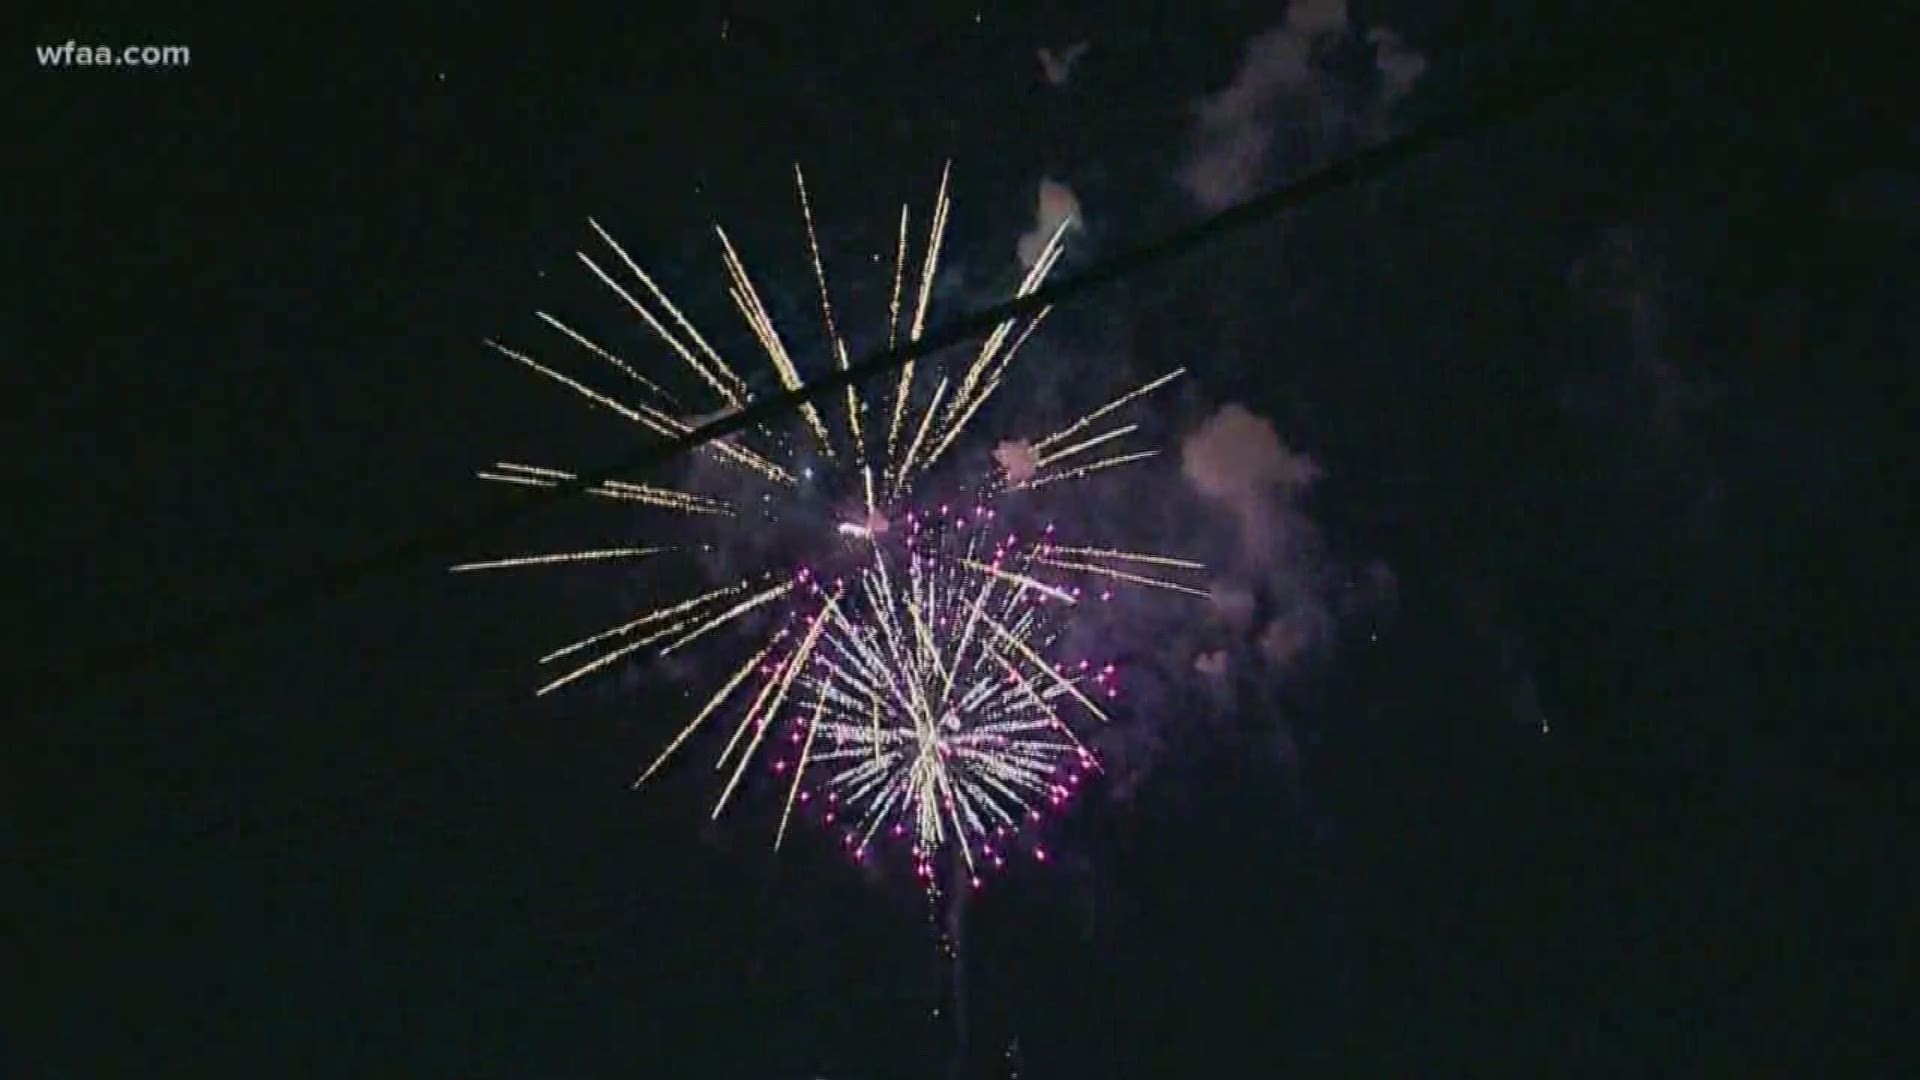 Thousands attended the largest fireworks display in North Texas on Wednesday evening.